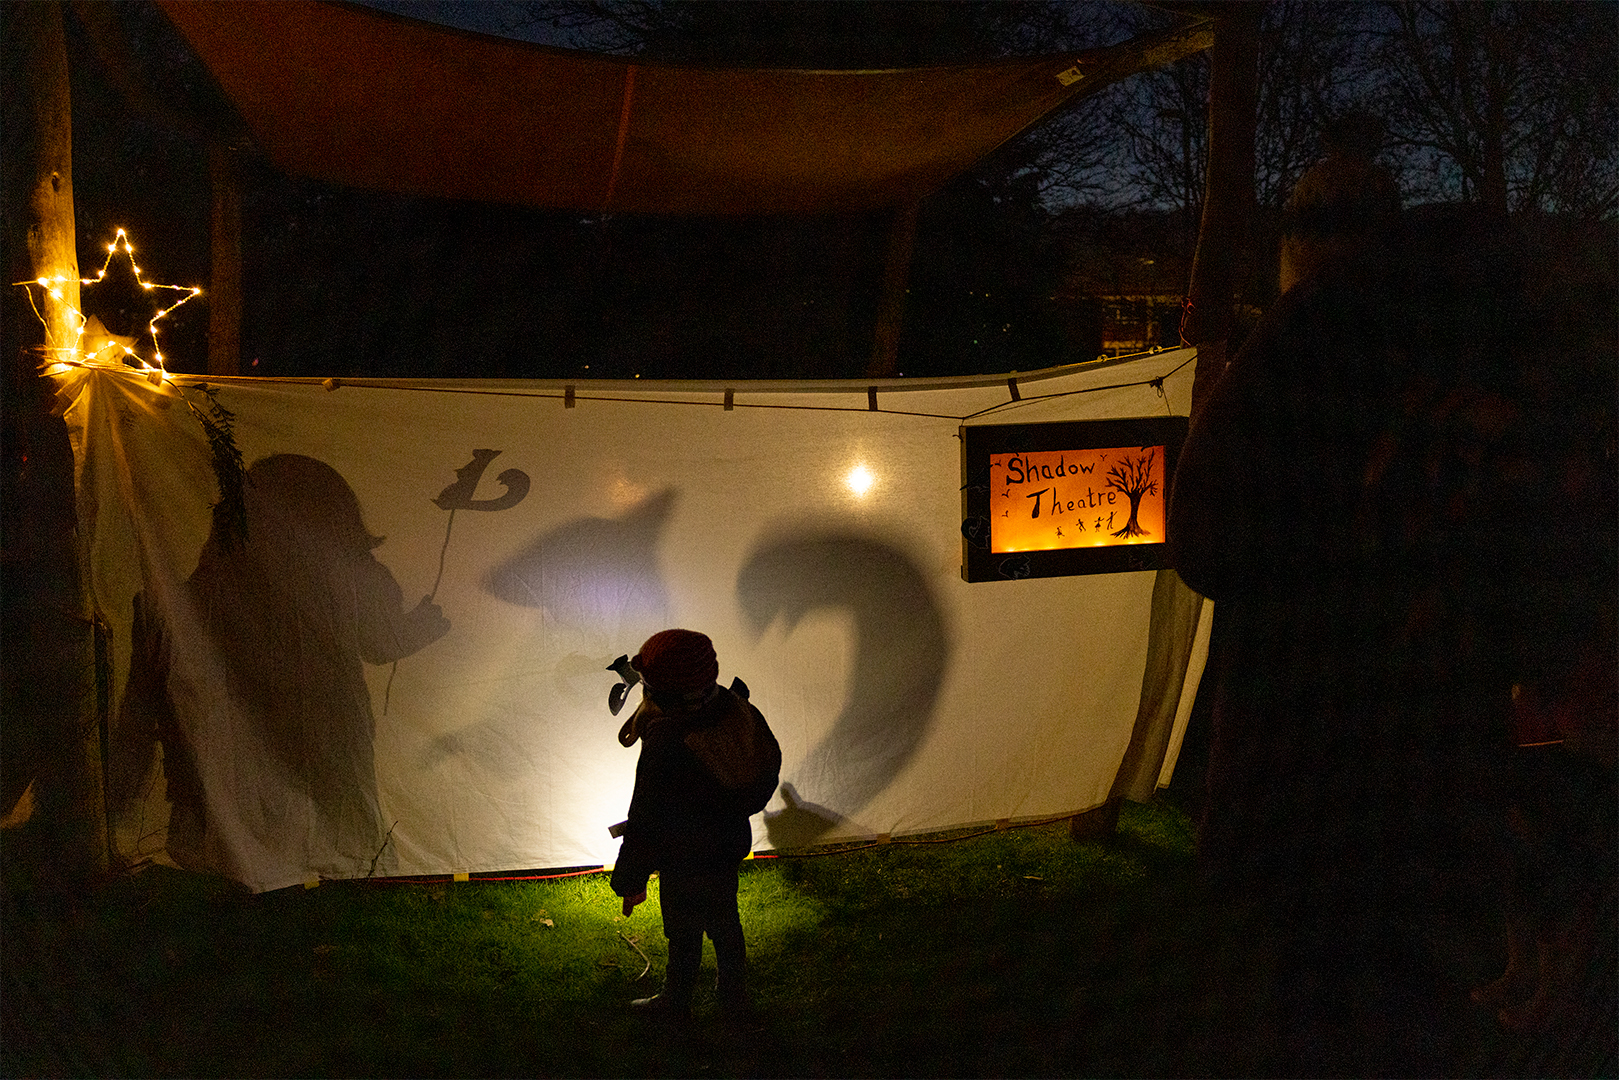 A shadow theatre at our Magical Lights event.